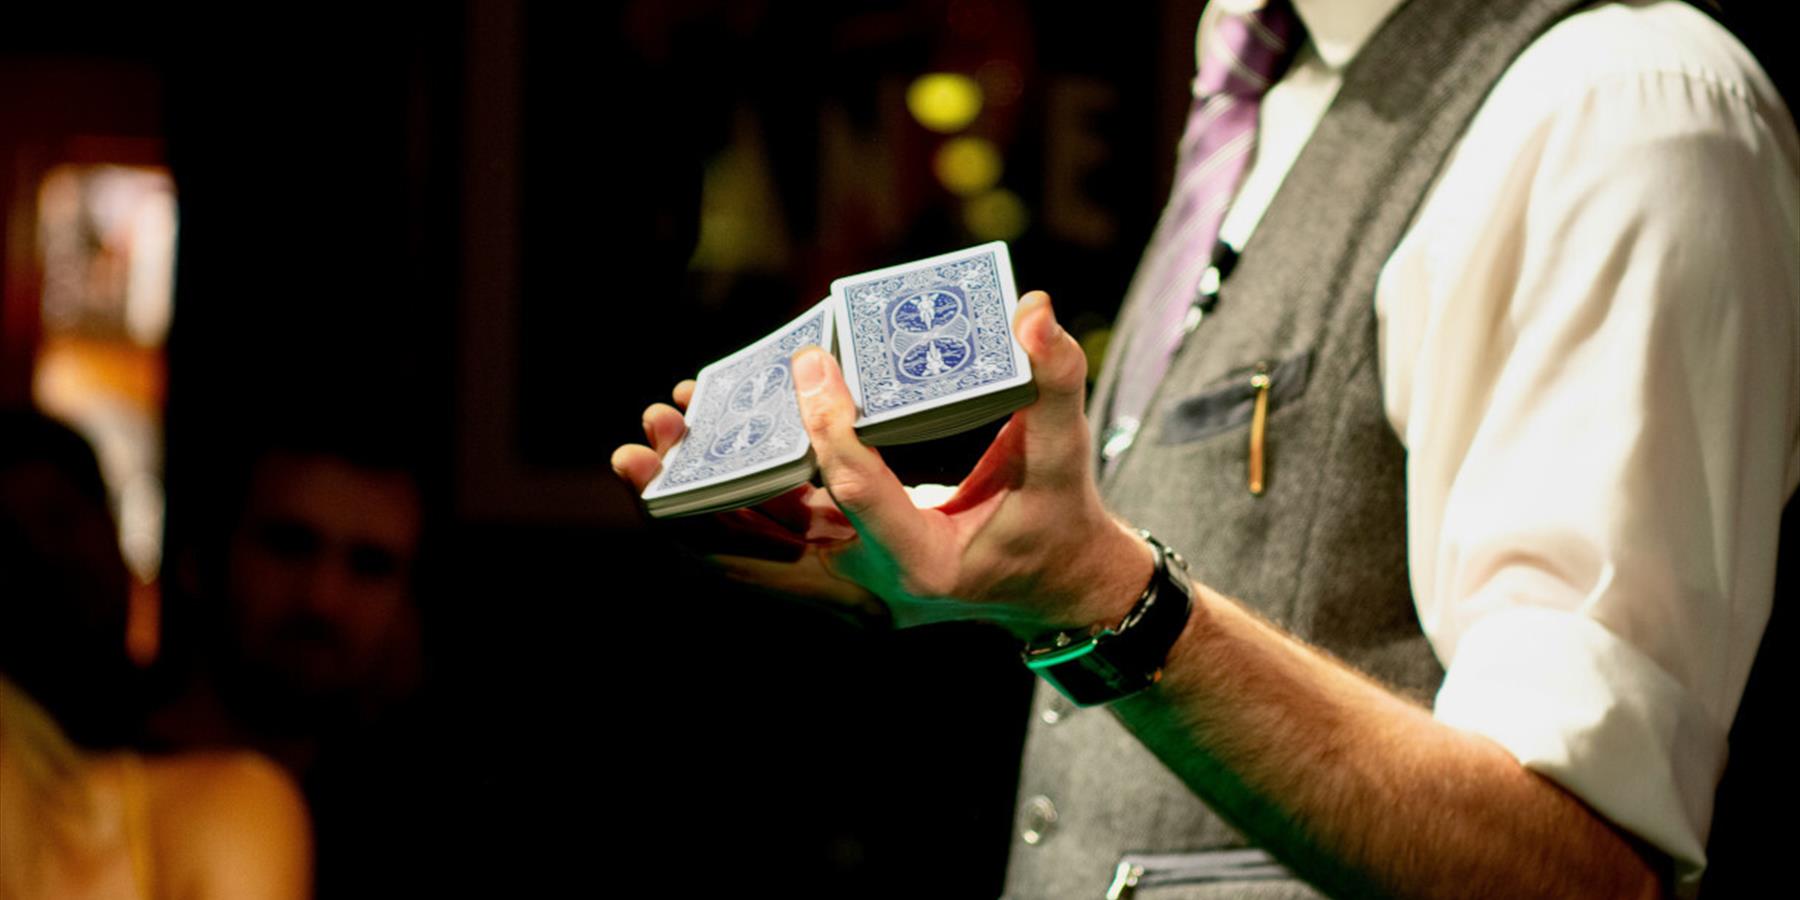 Person with grey waistcoat holding a deck of cards